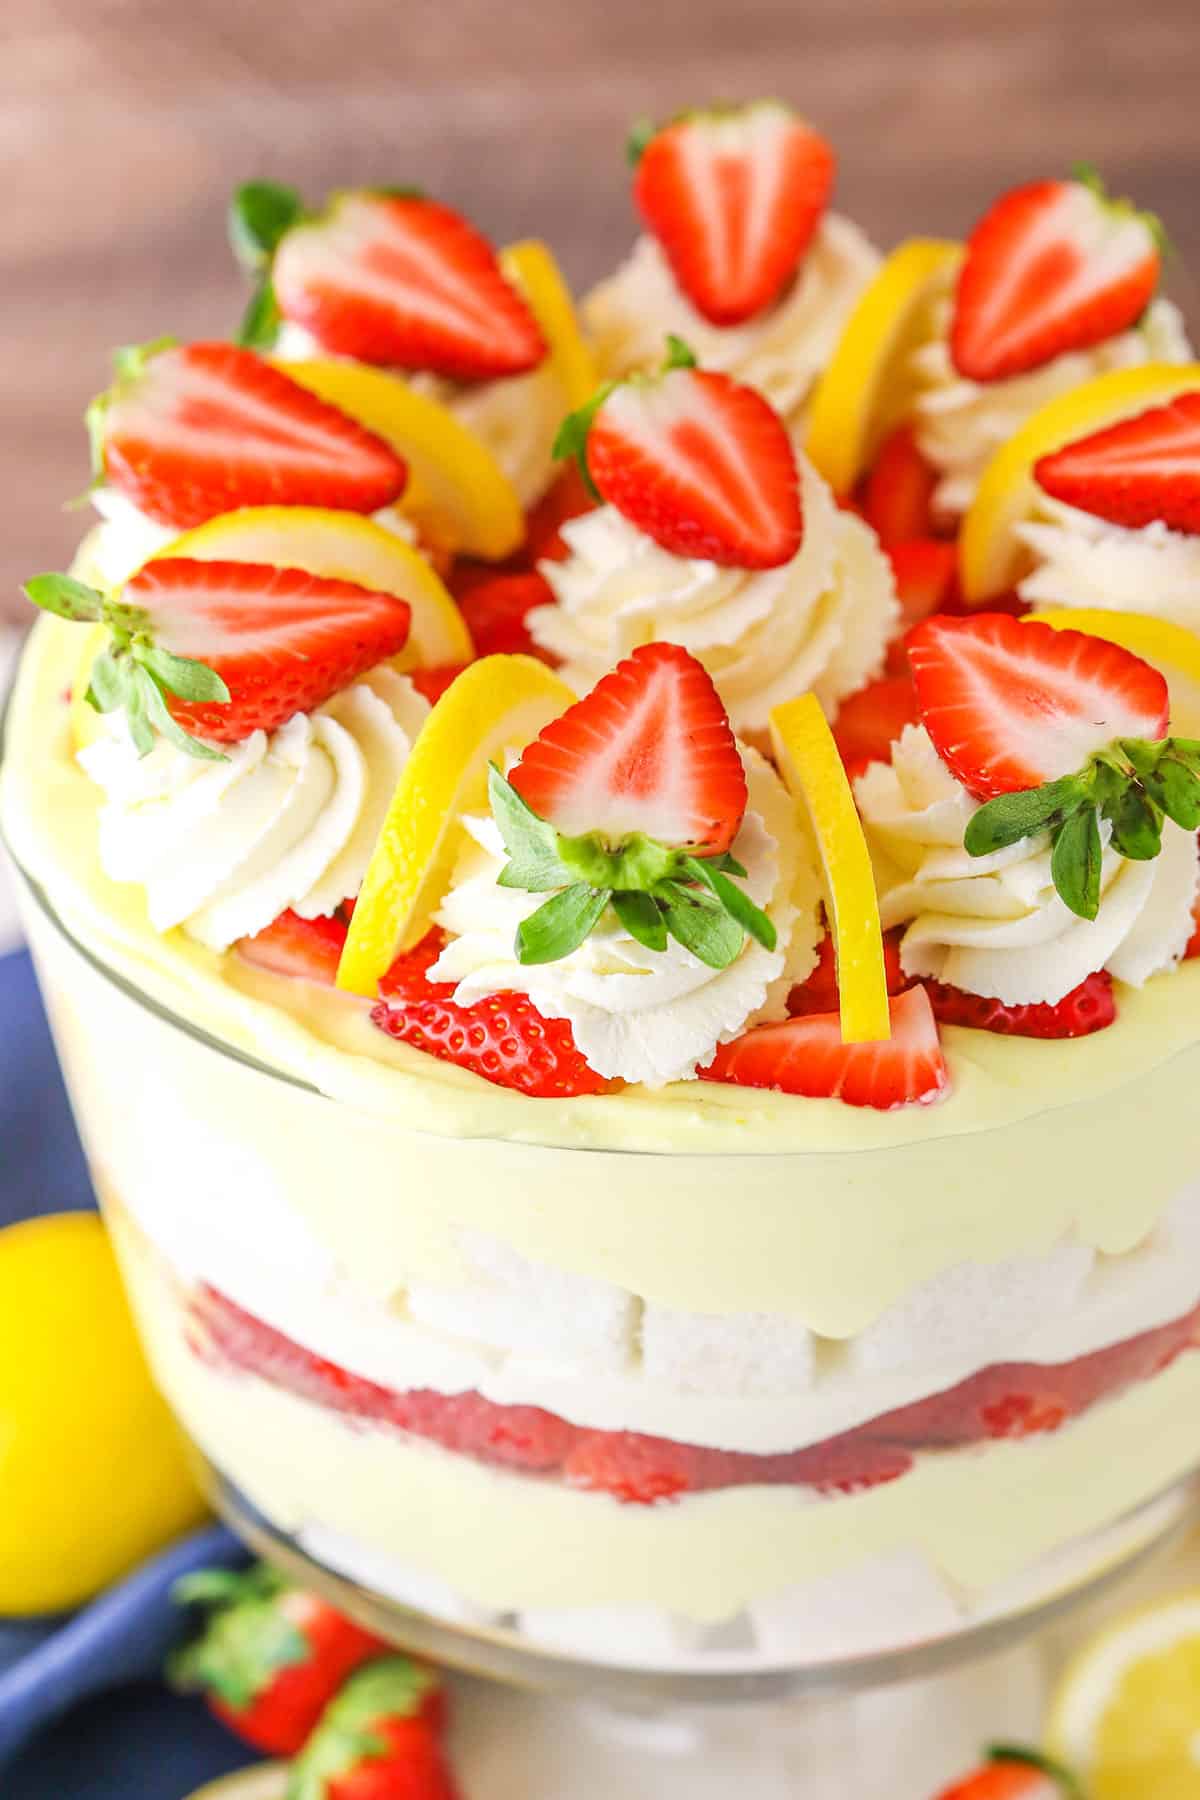 A Lemon Strawberry Trifle in a clear glass trifle bowl